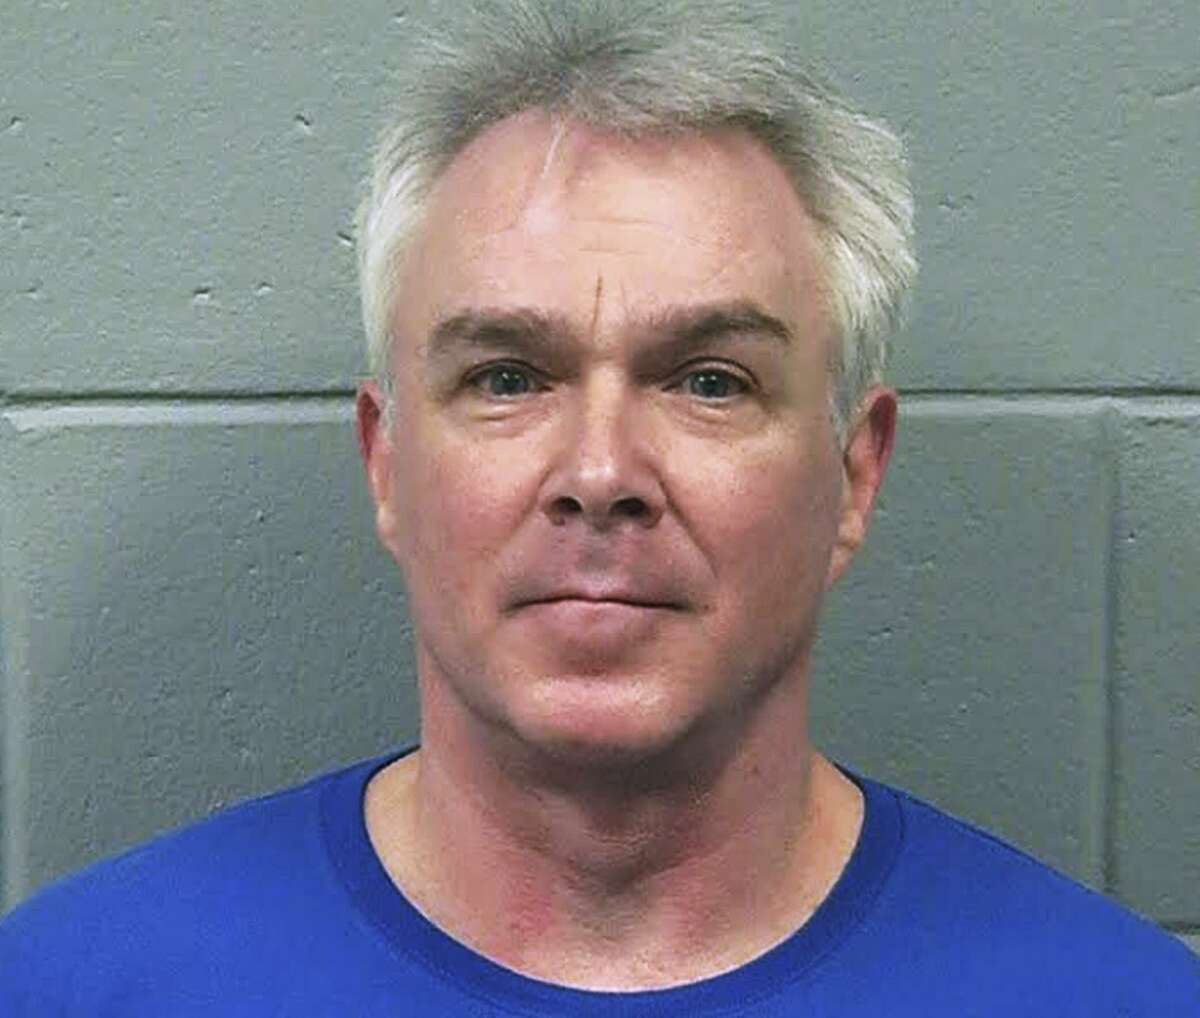 This booking photo by the Penobscot Sheriff's Office in Bangor, Maine, and released Thursday, June 13, 2019, by the Norwalk, Conn., Police Department shows Marc Karun, of Stetson, Maine, arrested Wednesday, June 12 on charges in connection to the 1986 rape and murder of 11-year-old Kathleen Flynn in Norwalk. (Penobscot Sheriff's Office/Norwalk Police Department via AP)